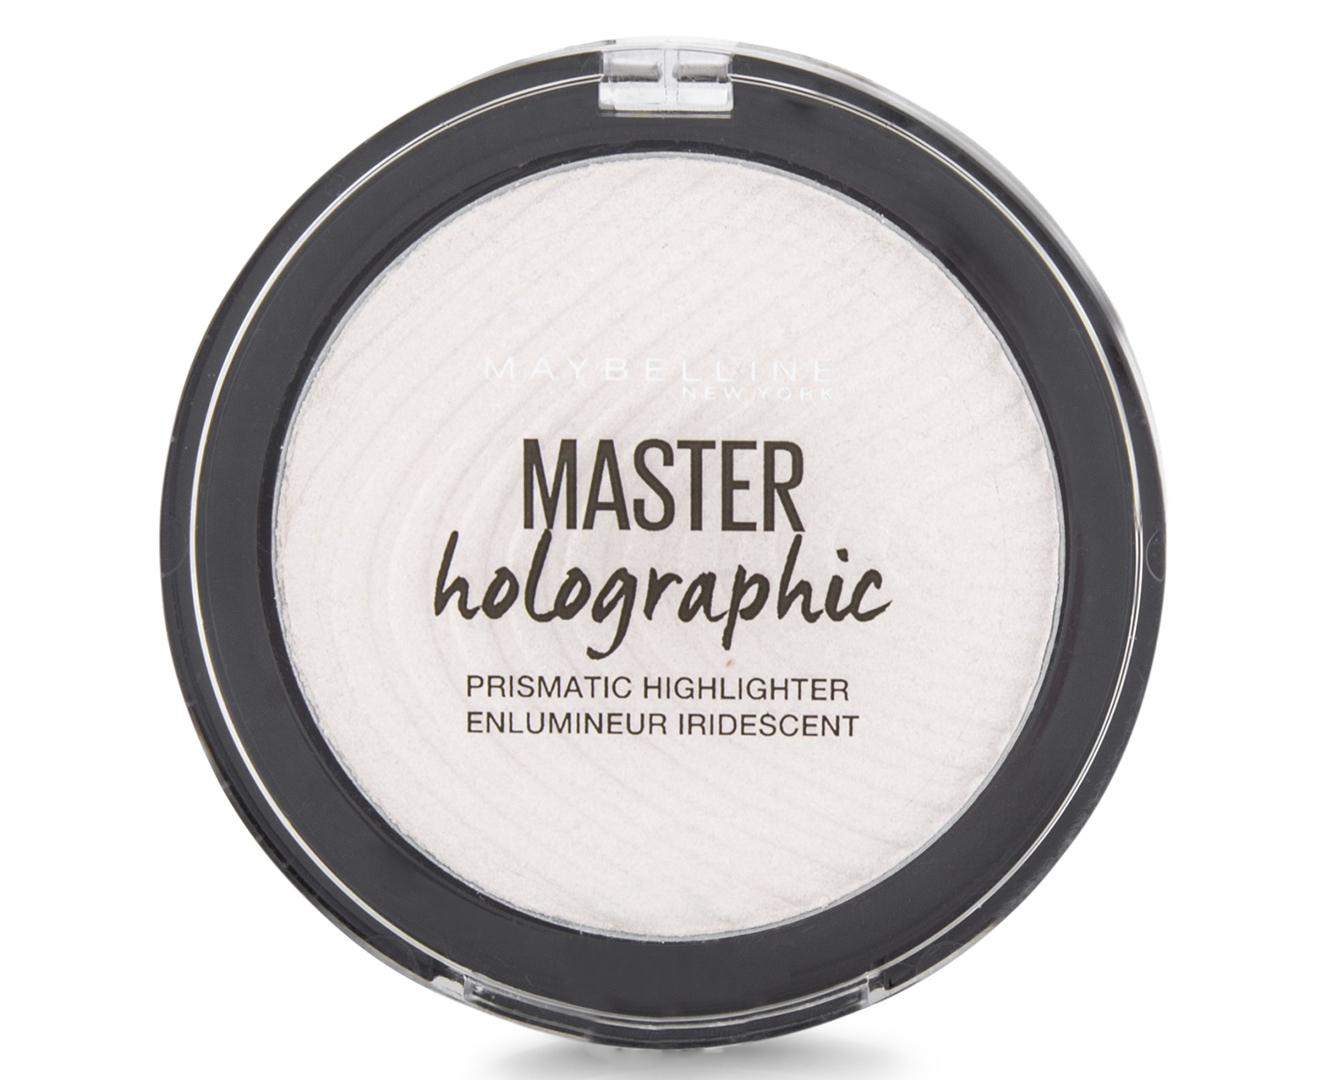 Maybelline Master Holographic Prismatic Highlighter 8g | Catch.co.nz